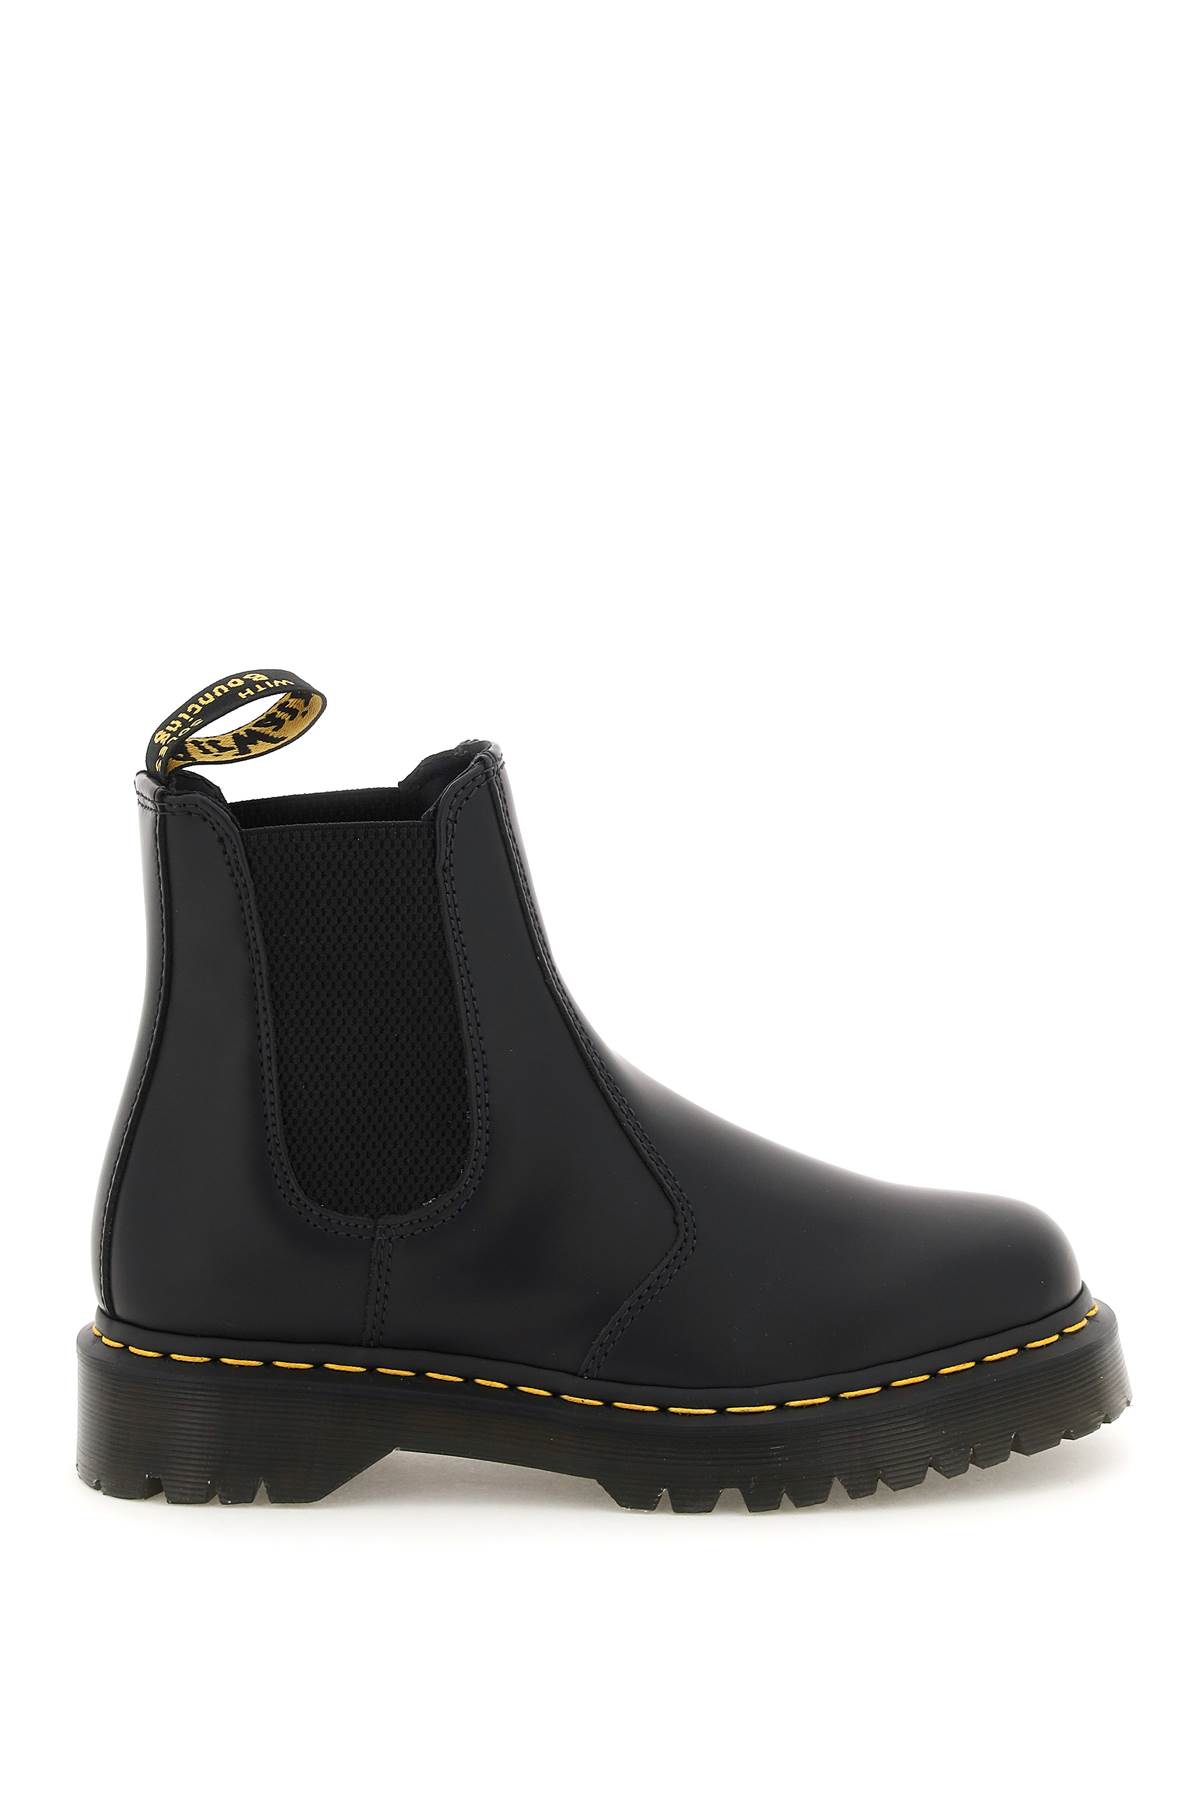 Dr. Martens 2976 Bex Smooth Chelsea Boots